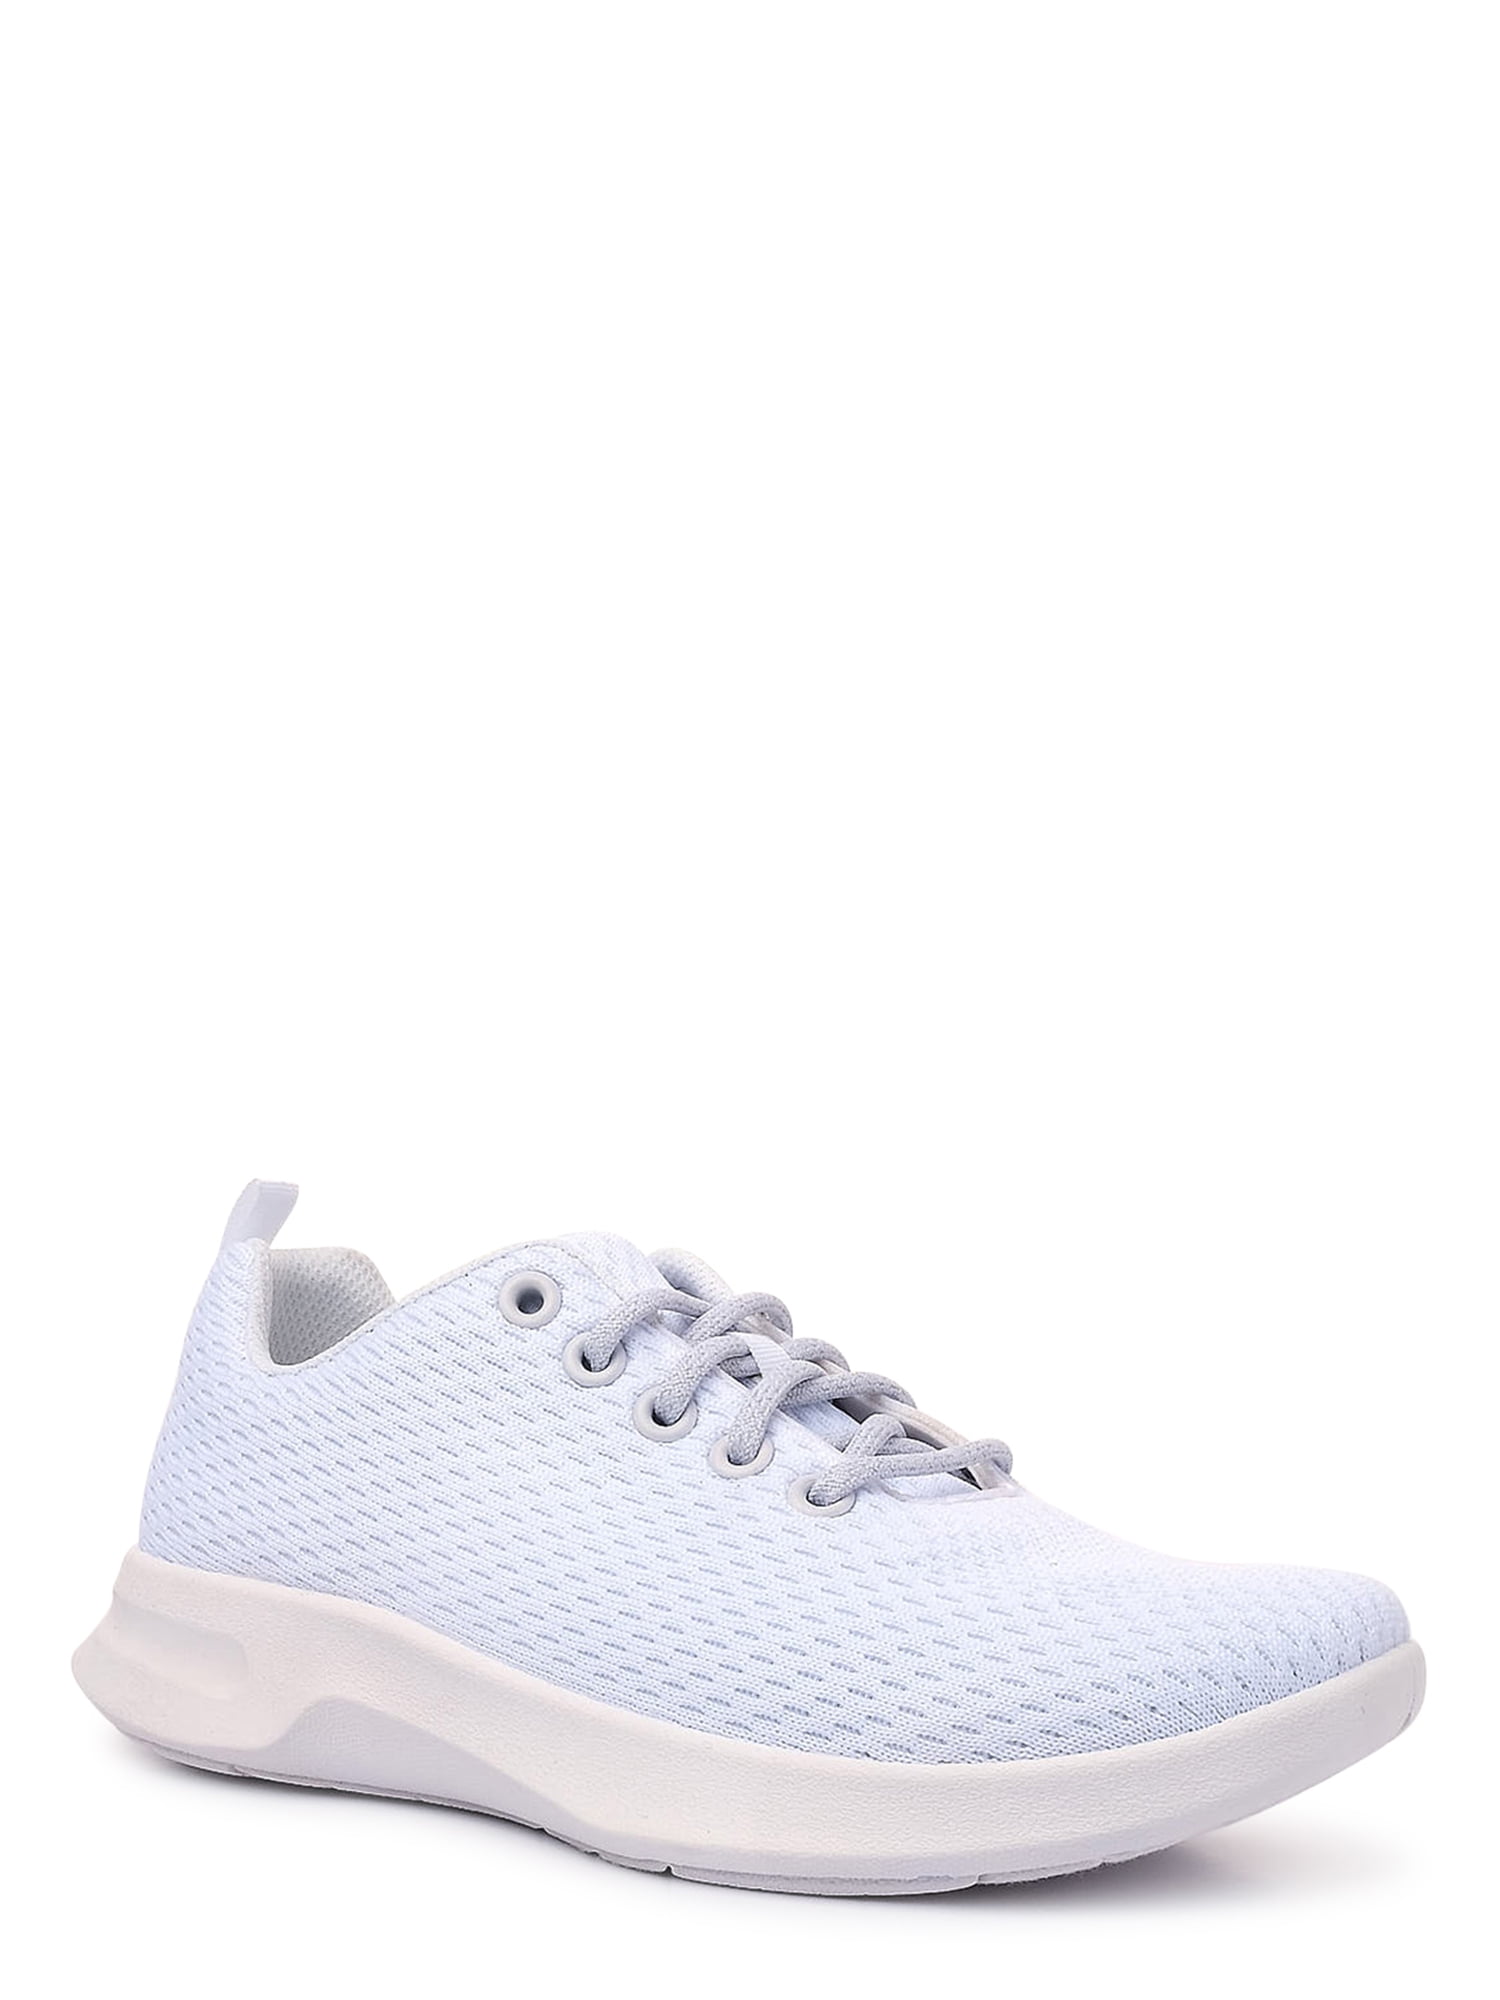 Athletic Works Women's Lifestyle Jogger Sneakers, Wide Width Available